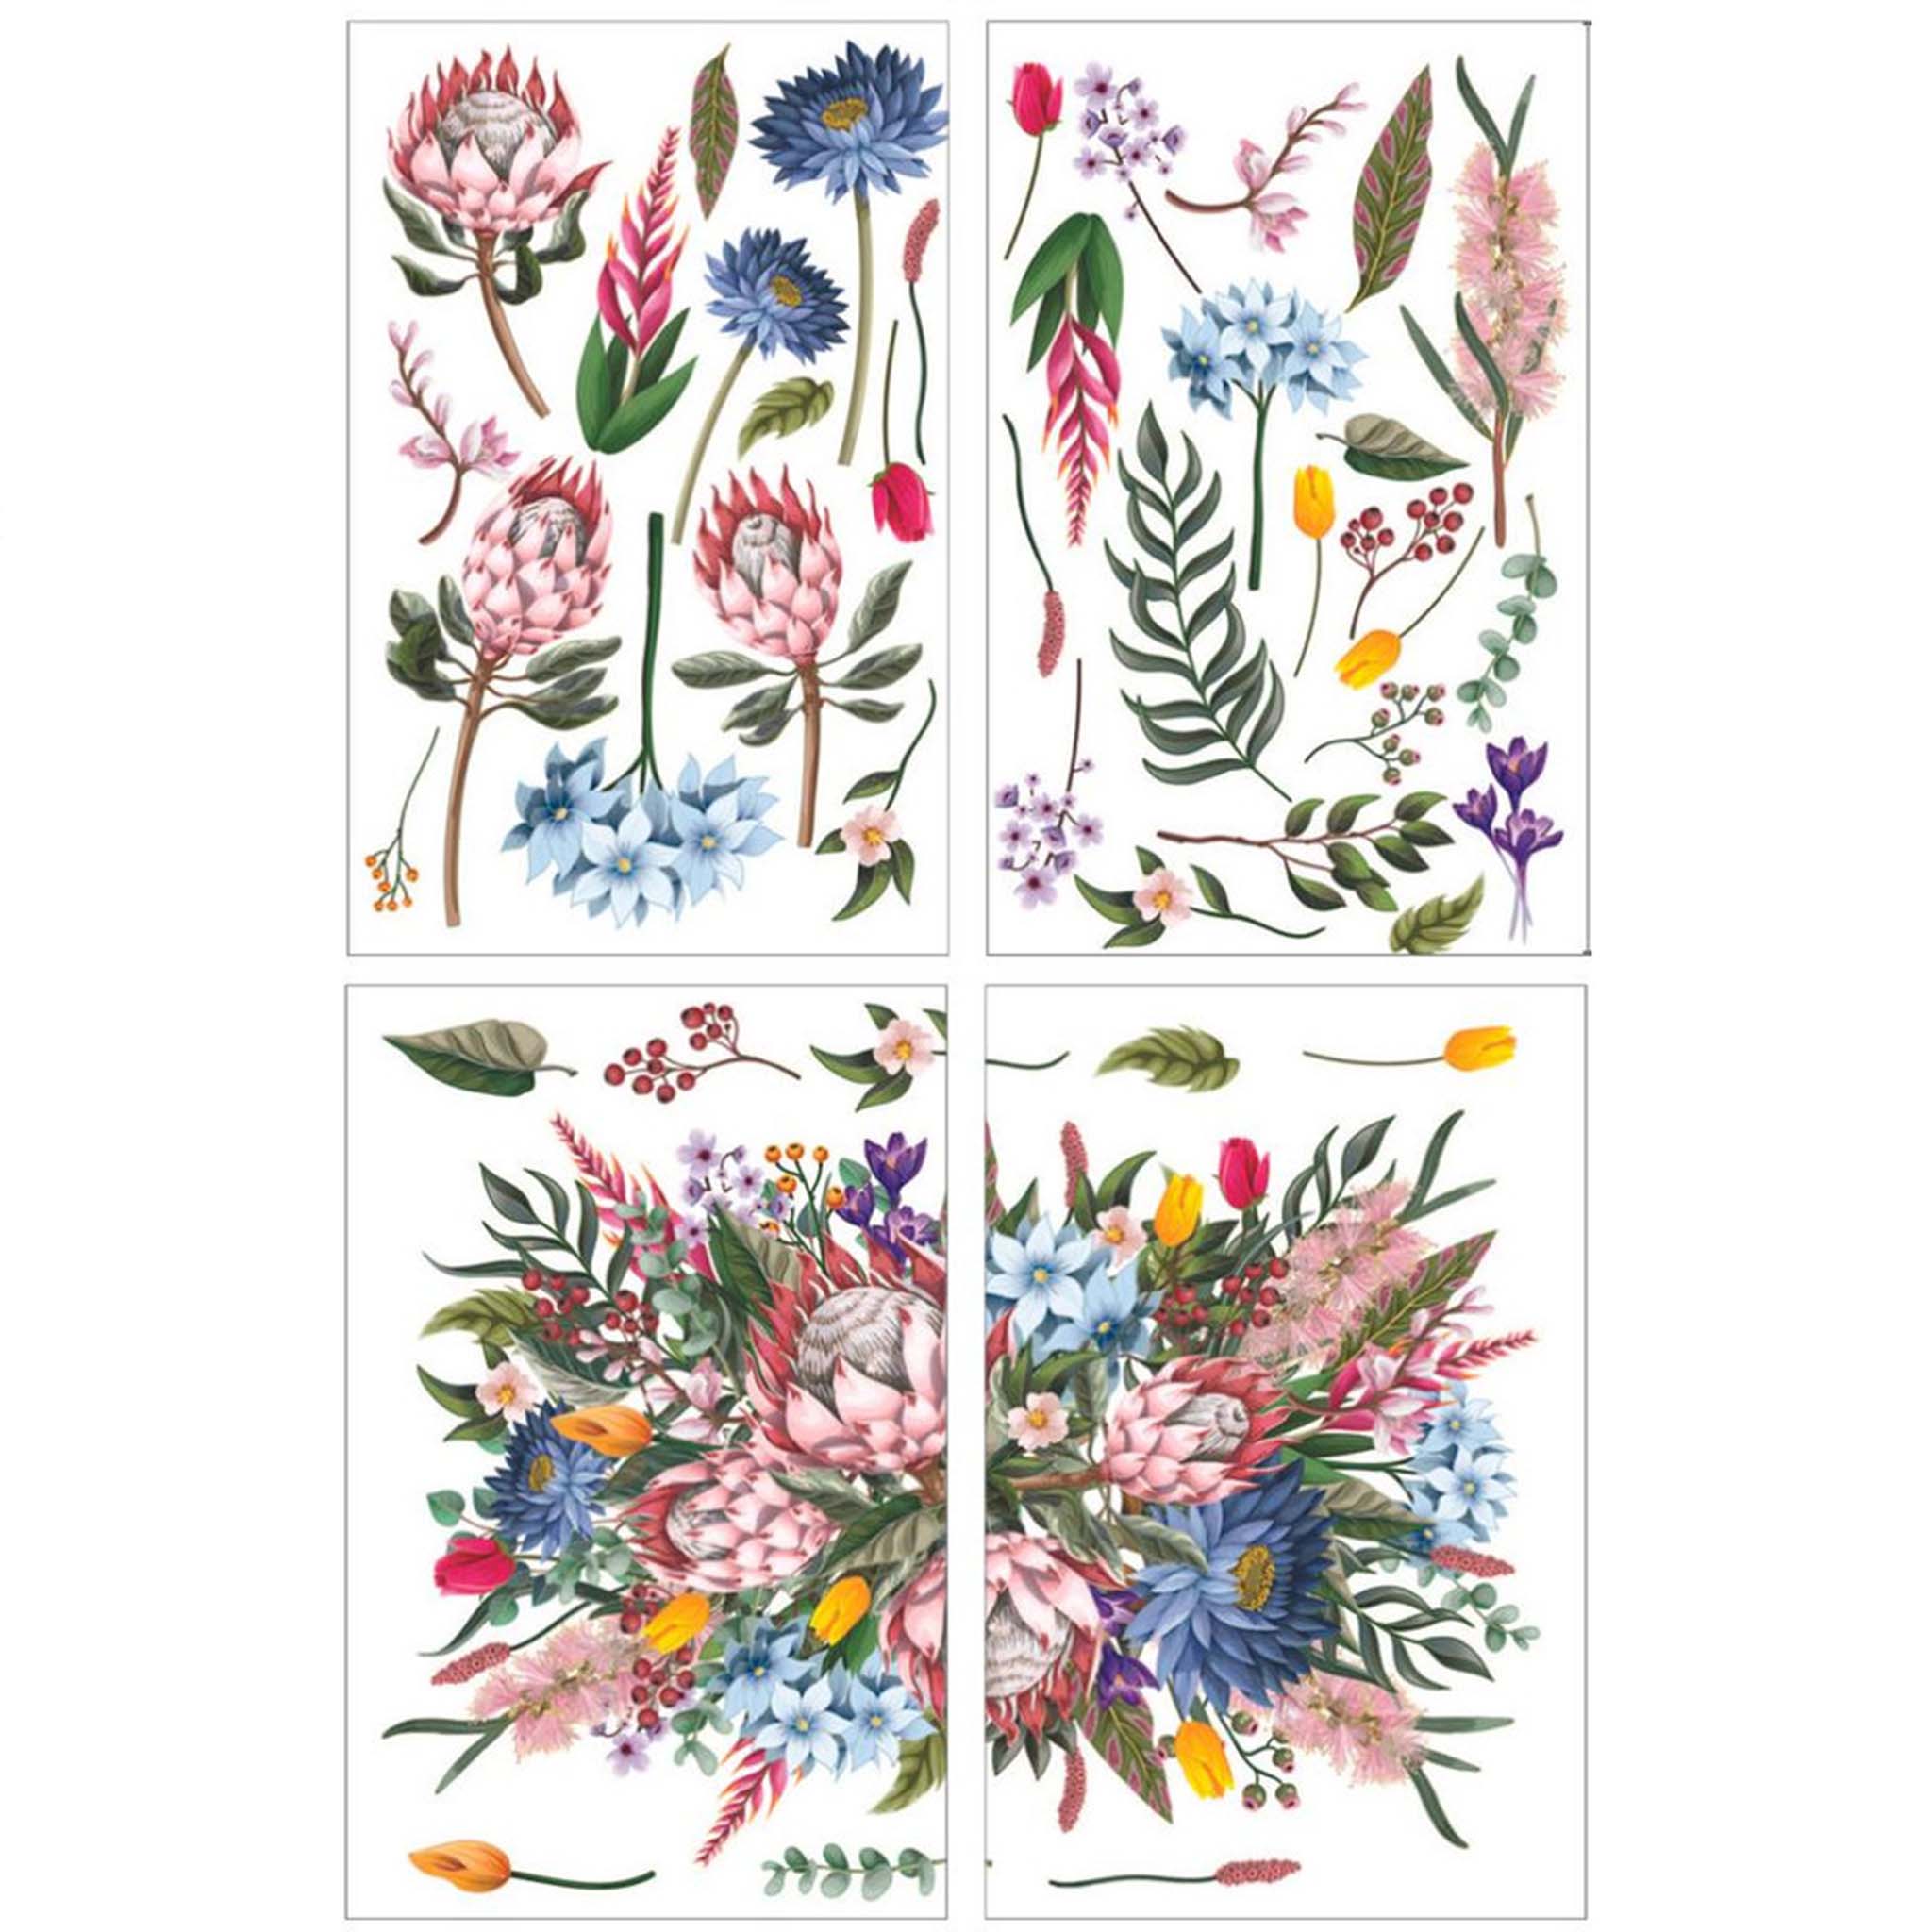 Four sheets of a rub-on transfer against a white background features a beautiful floral arrangement in shades of pink, blue, purple, and yellow, surrounded by delicate single flowers.